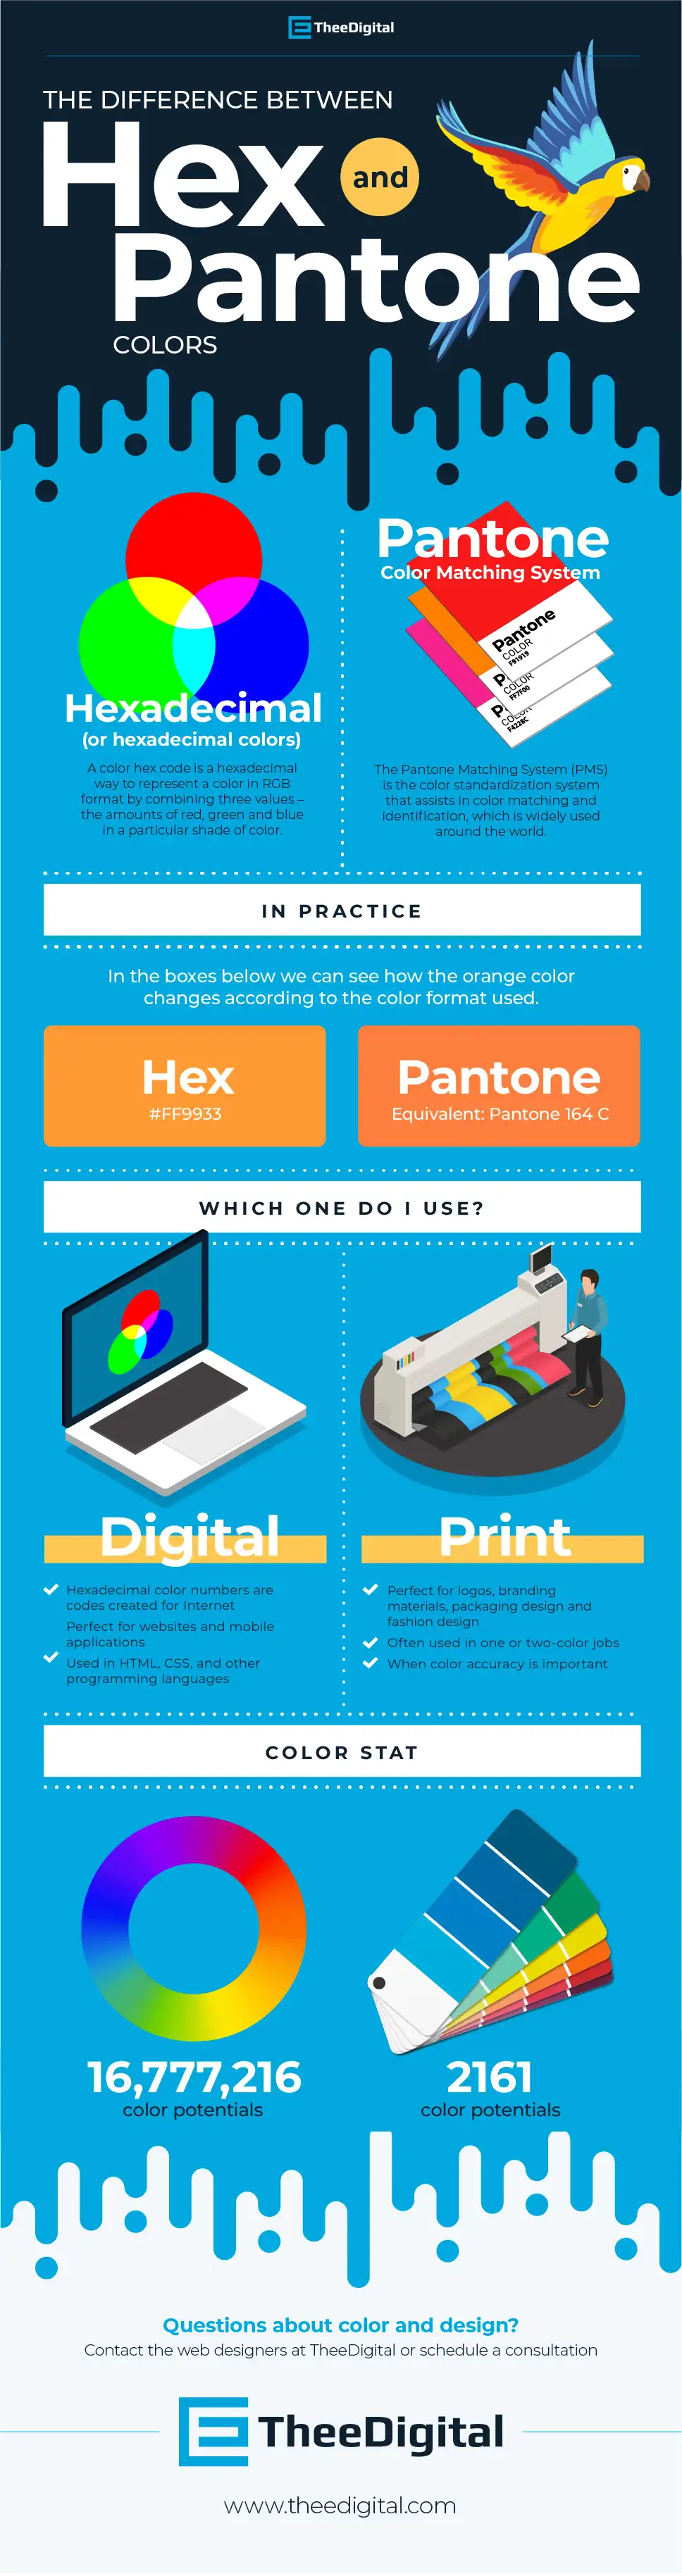 Infographic that shows the differences between hexadecimal and pantone colors